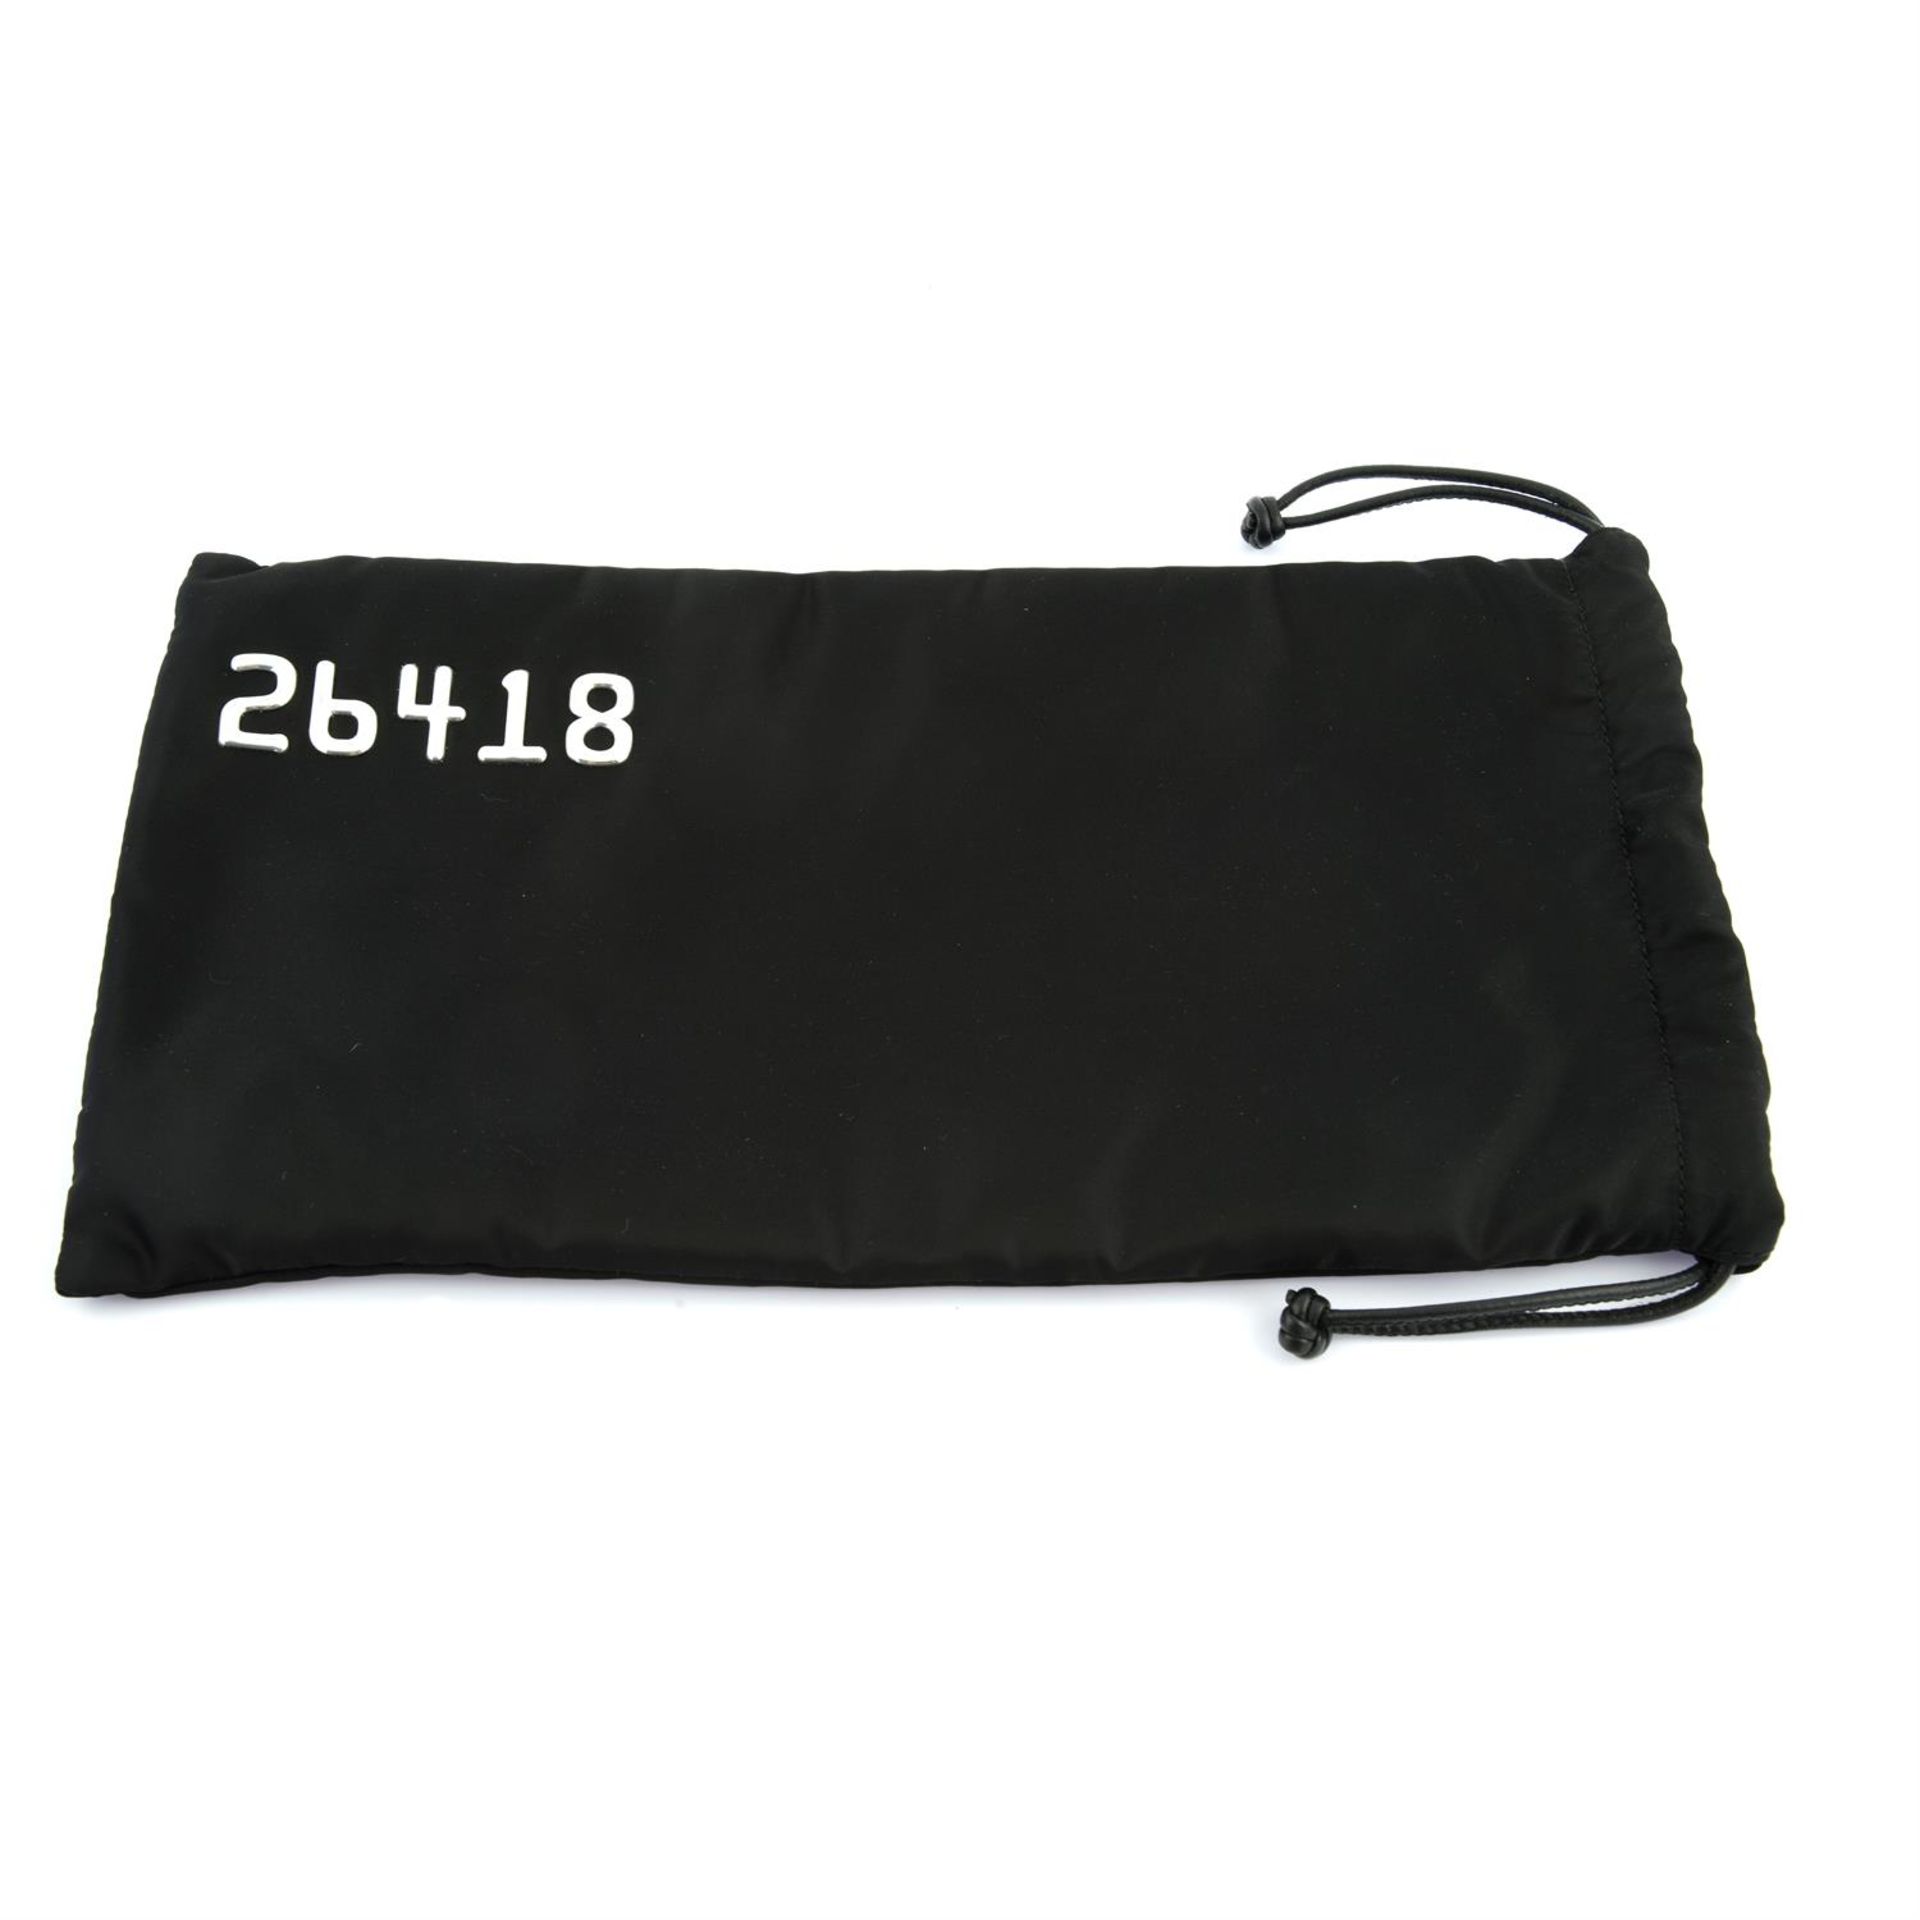 ALEXANDER WANG - a draw string pouch. - Image 3 of 4